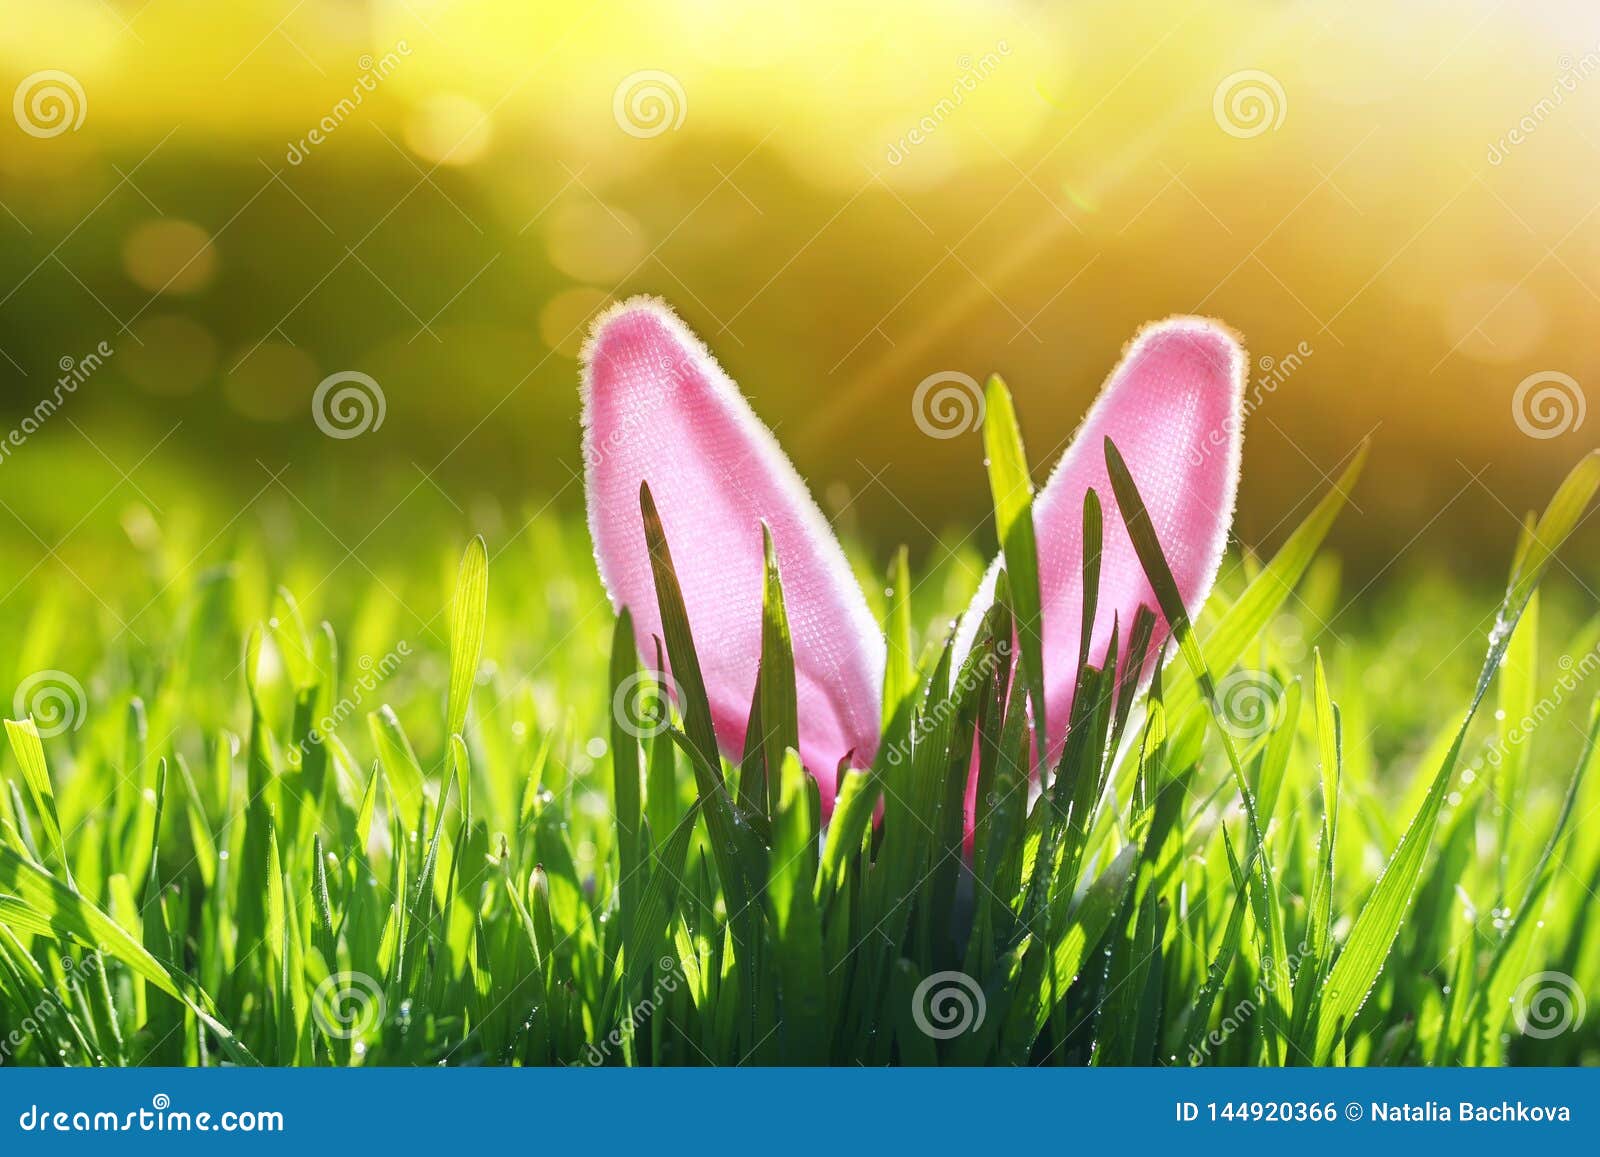 easter card with merry funny rabbit pink ears protrude from green grass on a sunny spring bright meadow